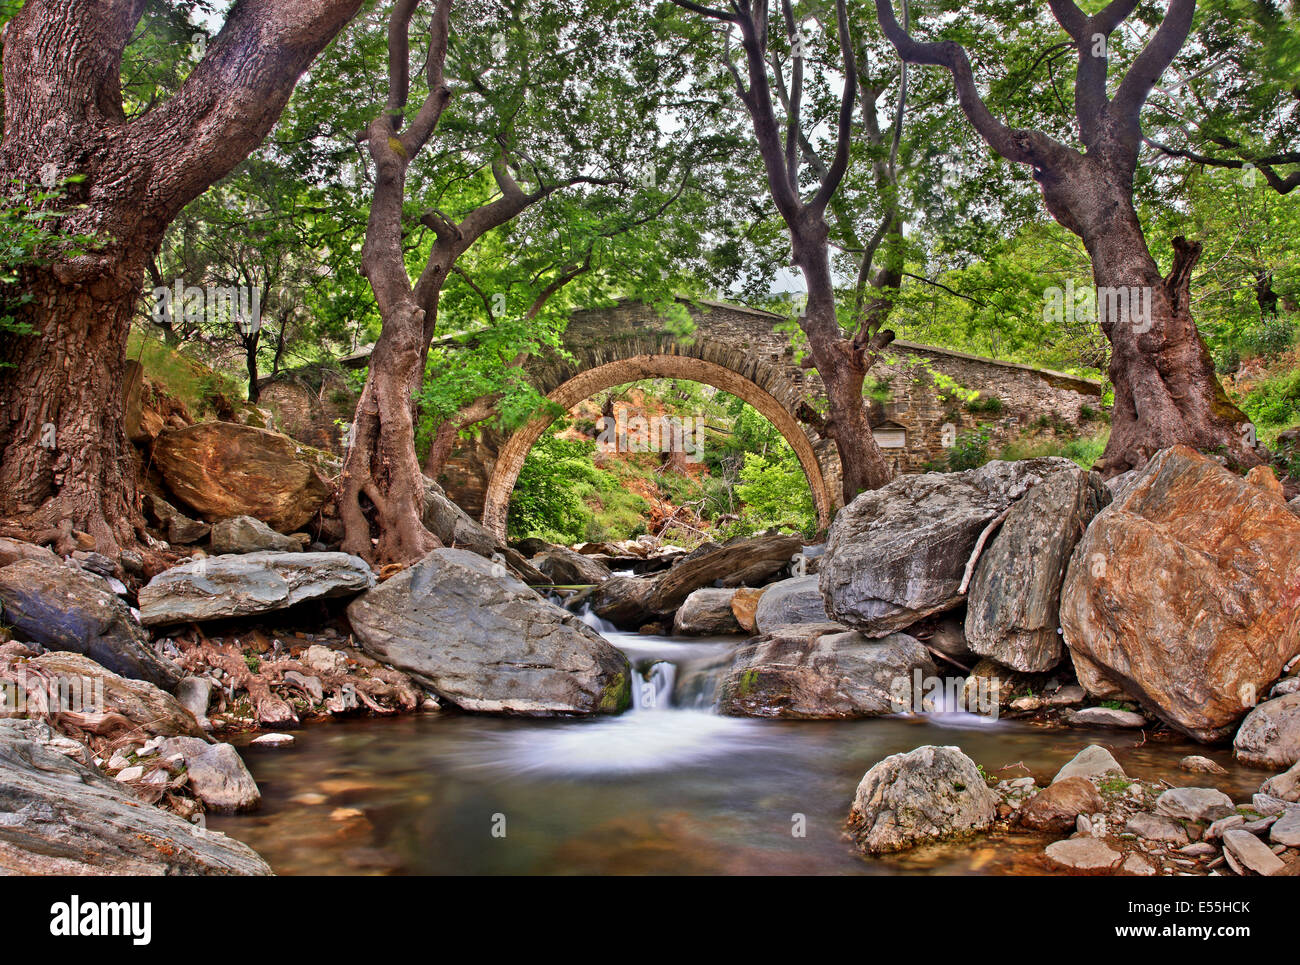 The old stone arched bridge right below Platanistos village, Evia ('Evoia') island, Central Greece. The locals call it 'Artino'. Stock Photo